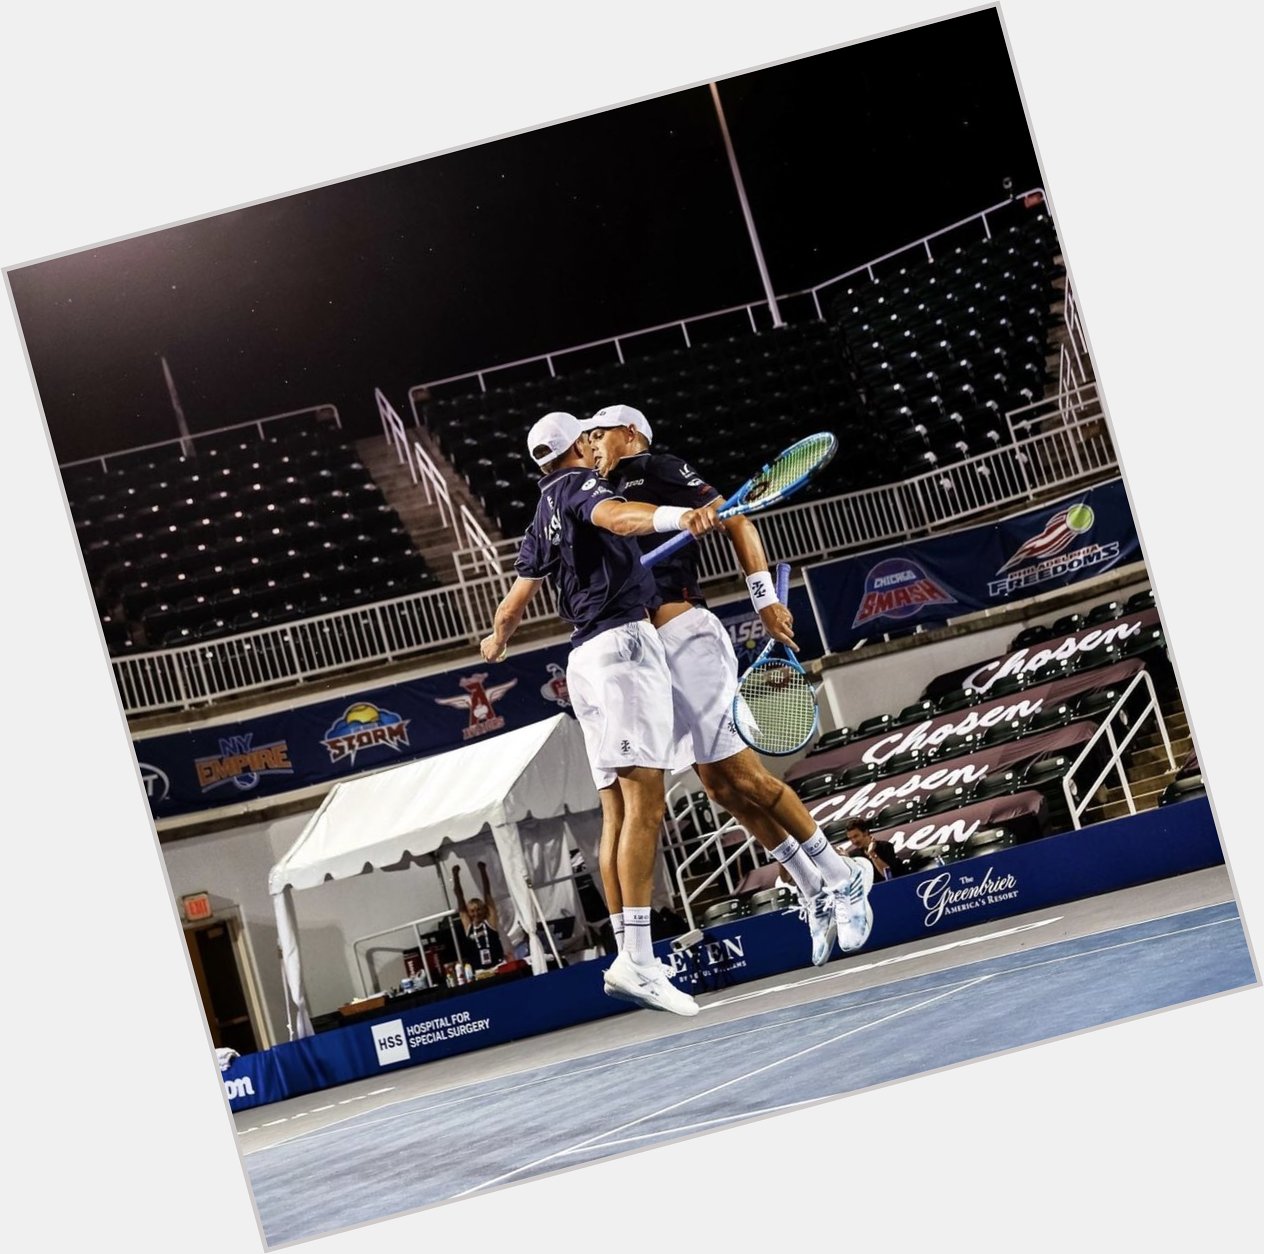 Happy Birthday to our favorite doubles duo, Bob and Mike Bryan! 